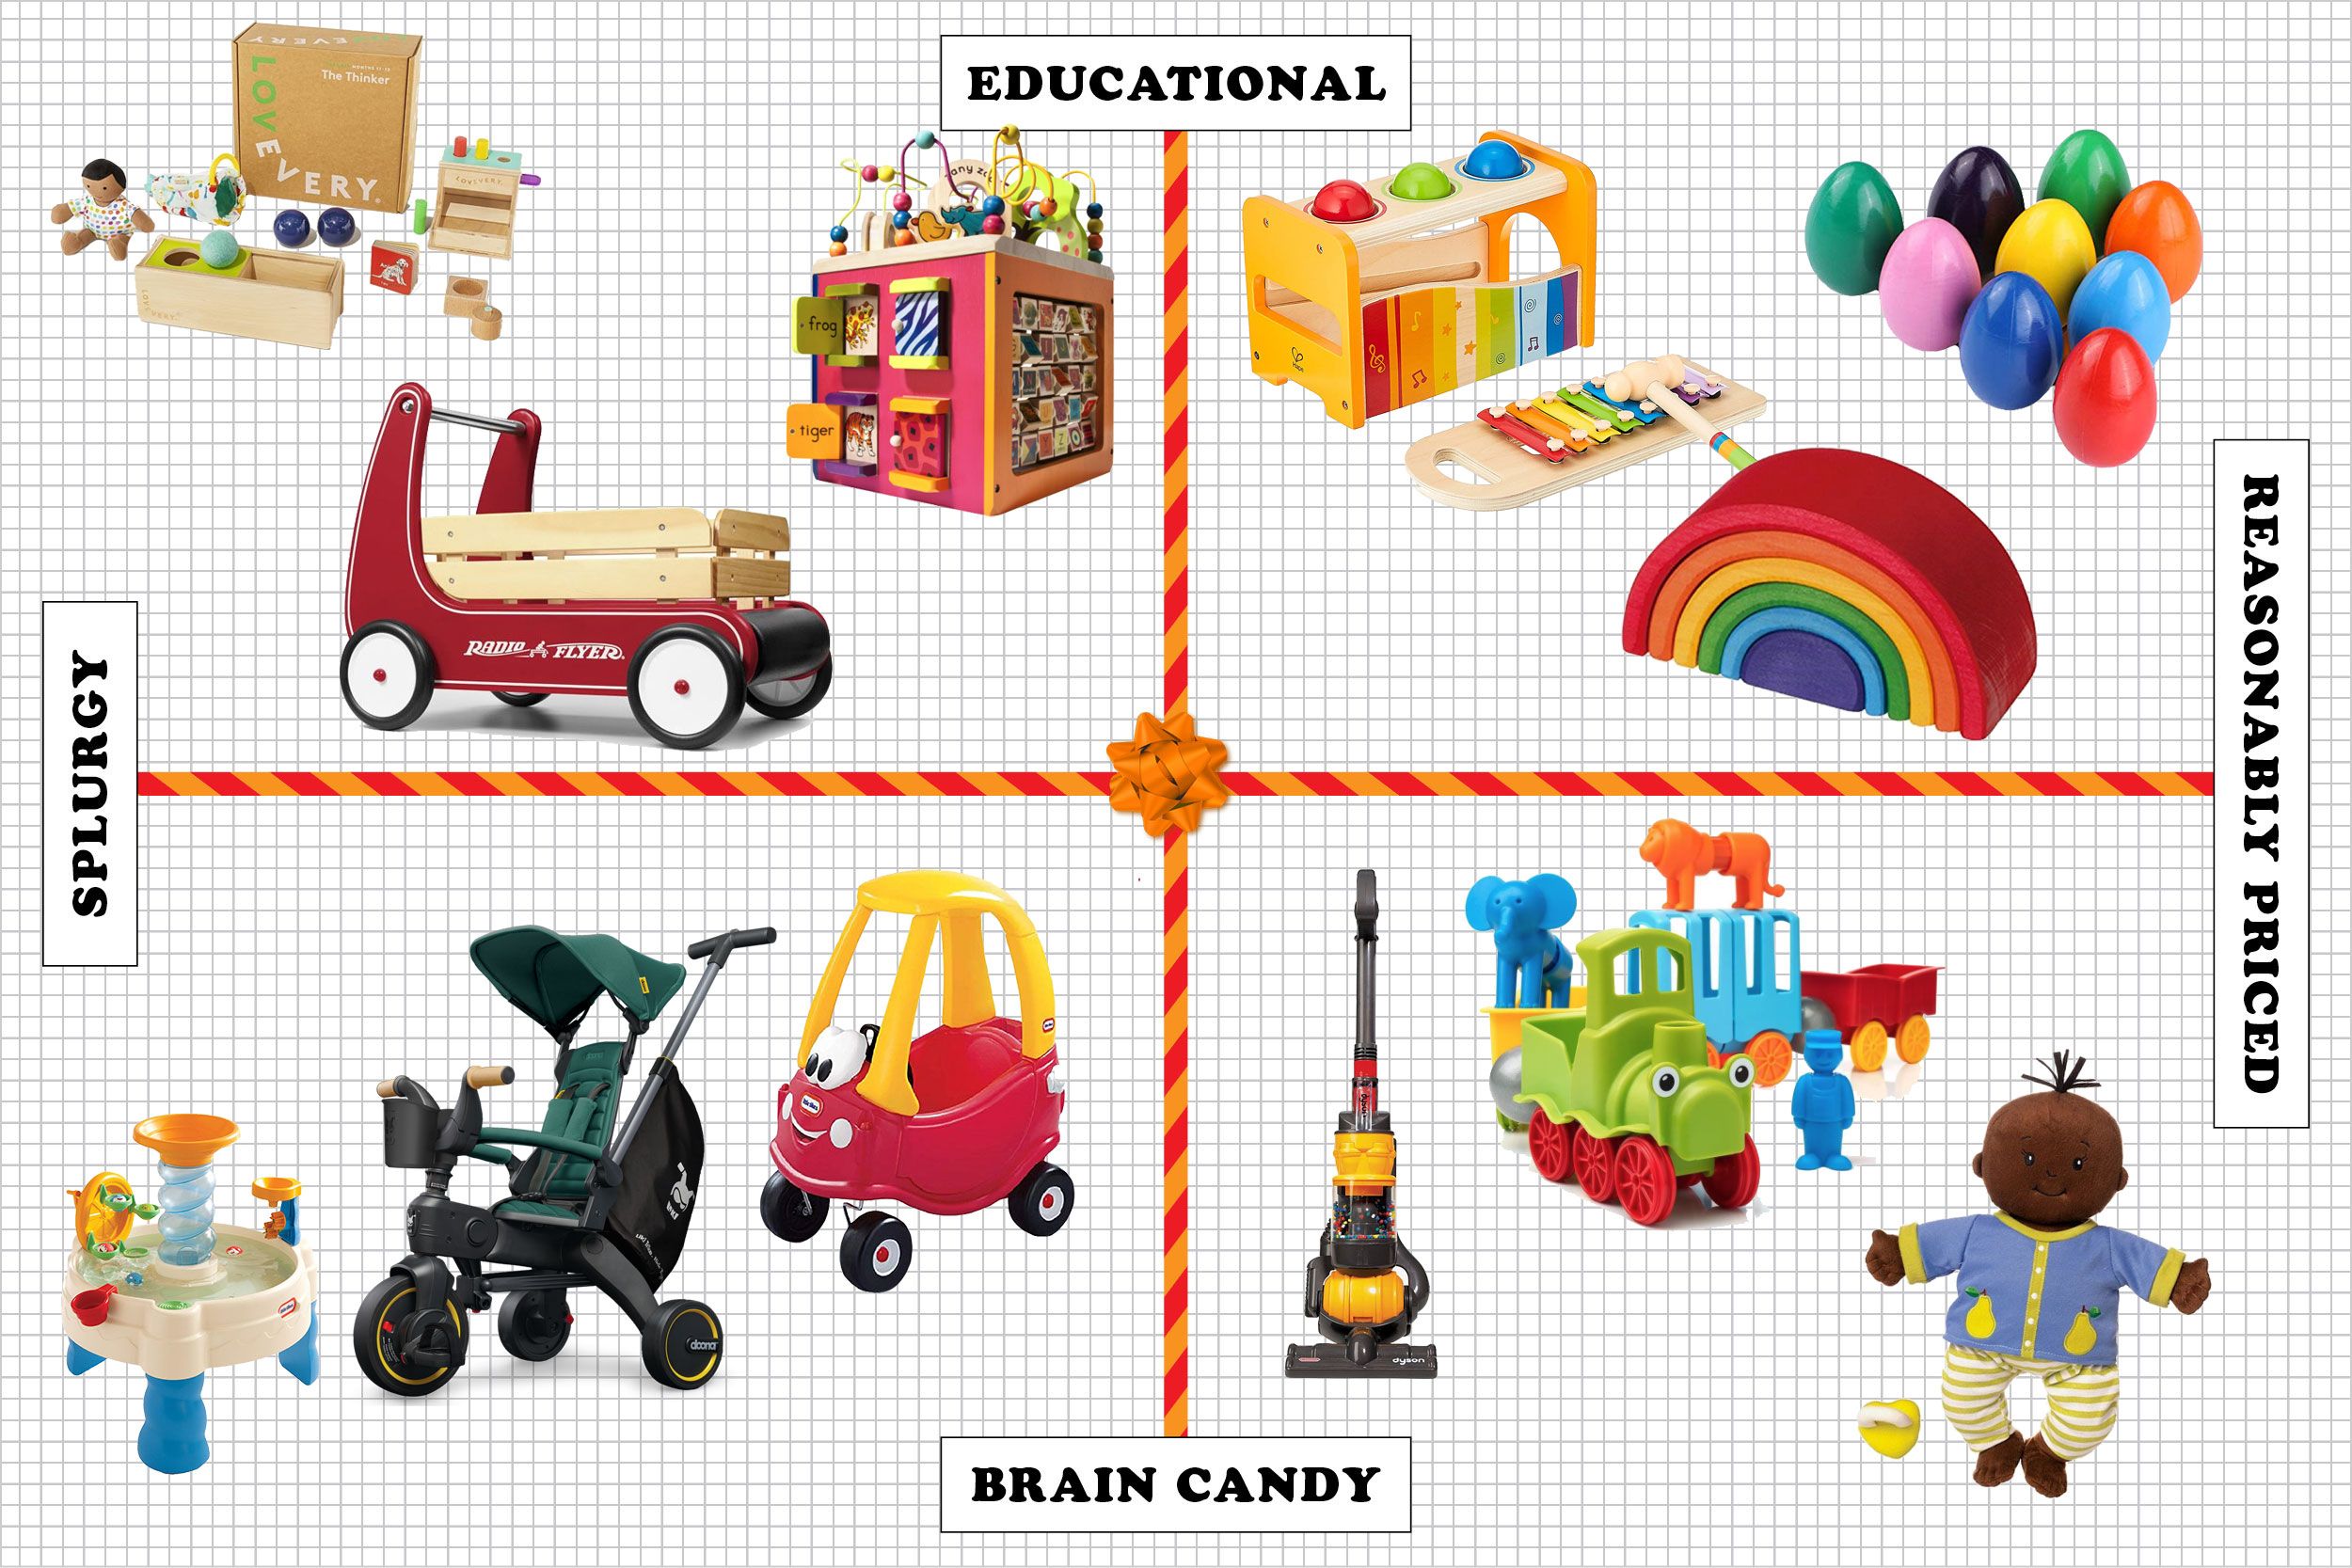 Educational Toys For 2 Year Olds Toddlers 1 to 3 Learning Age Boys Girls Gifts 